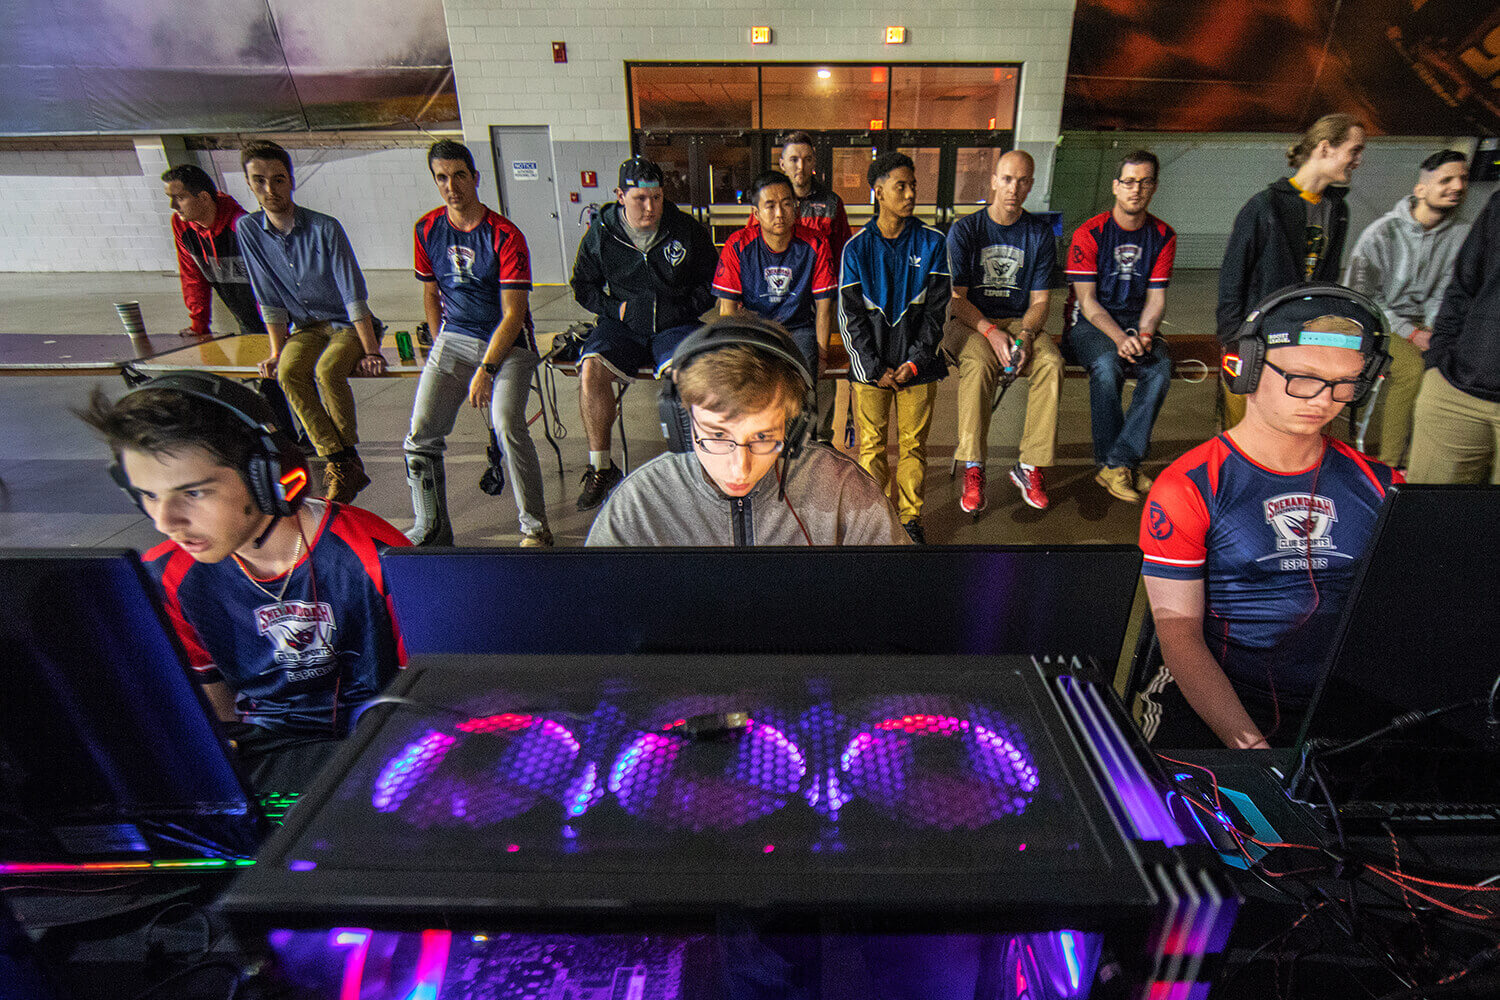 Colleges Gather at Shenandoah for University’s First Esports Tournament Eight Teams Face Off In Overwatch, Rocket League and League of Legends